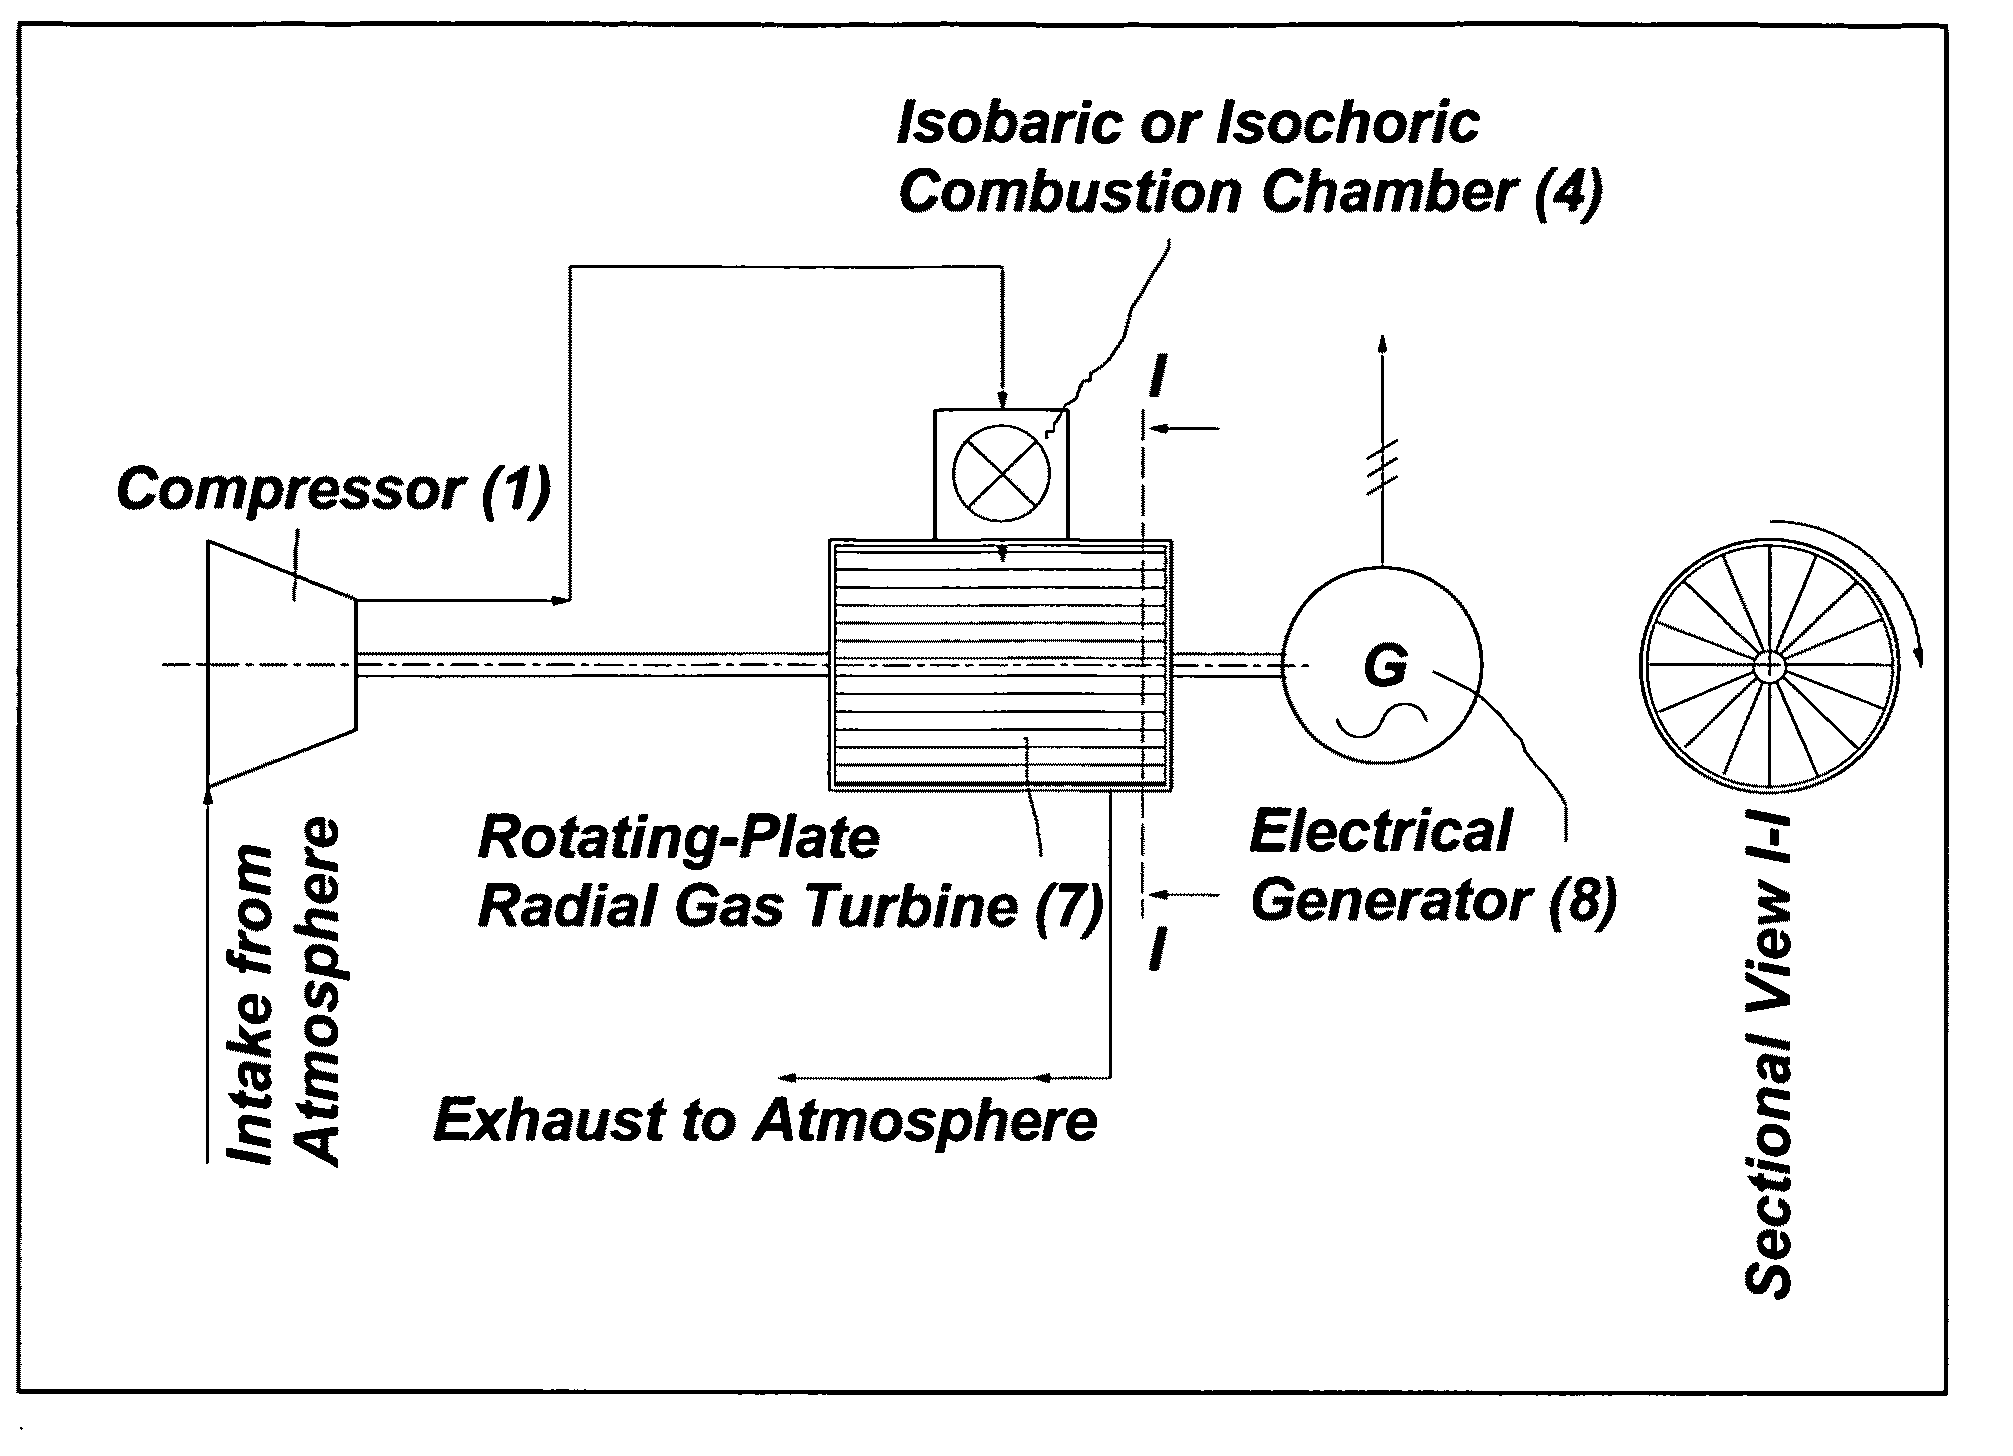 Rotating-Plate Radial Turbine in Gas-Turbine-Cycle Configurations